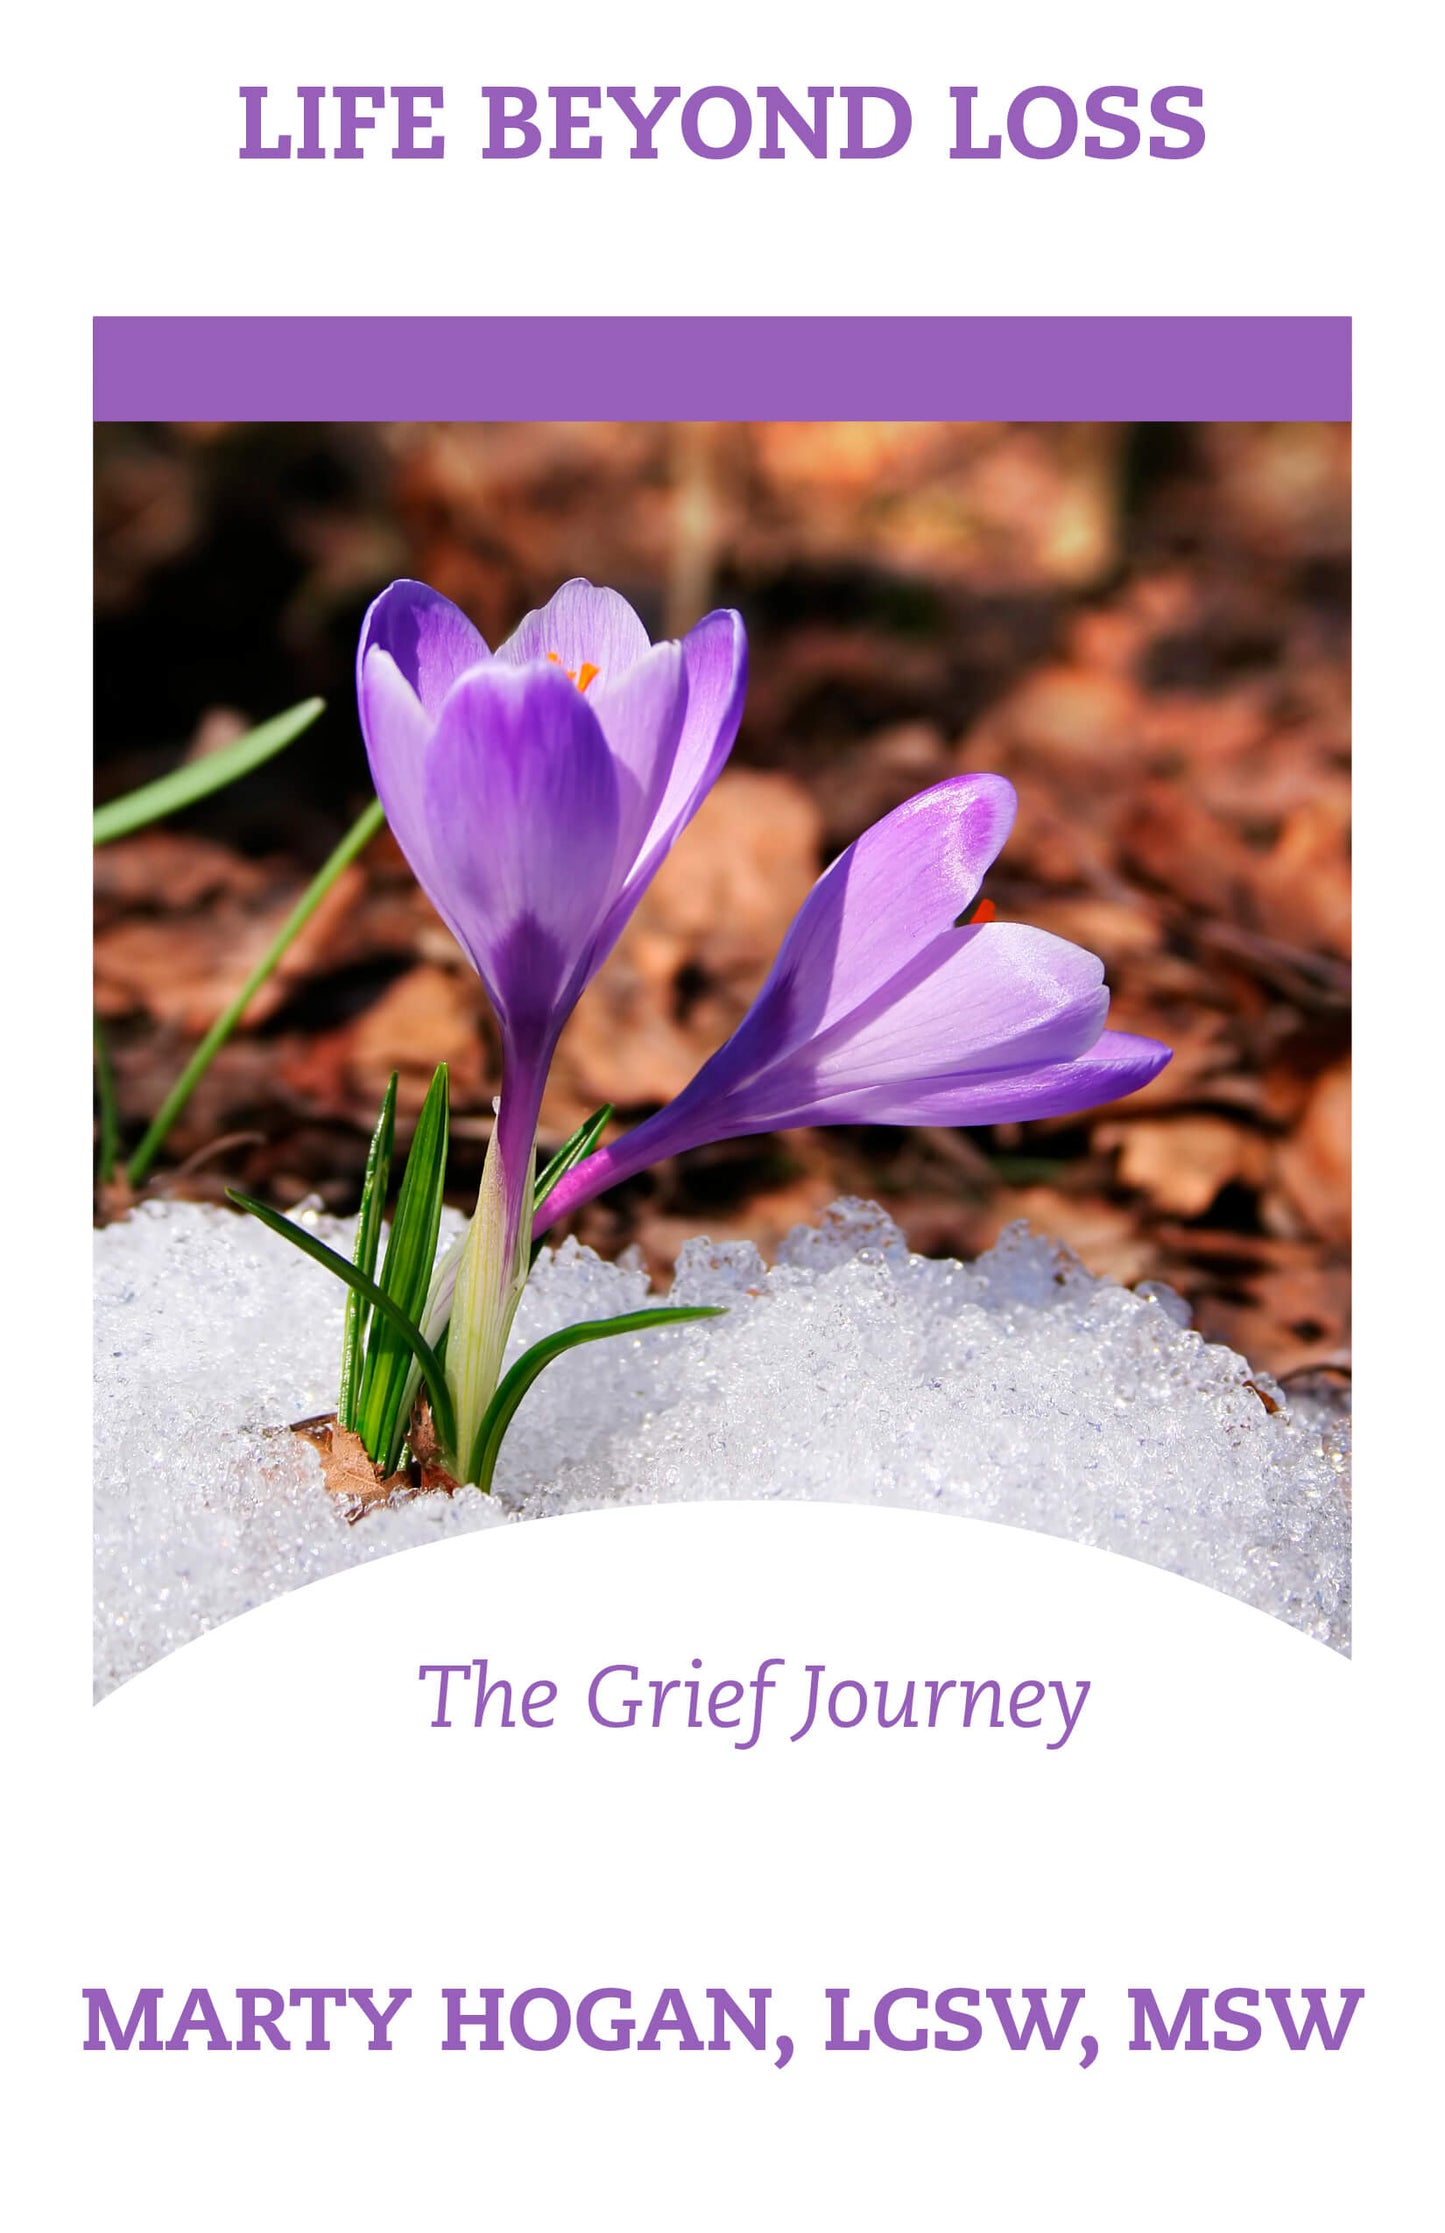 Life Beyond Loss - The Grief Journey